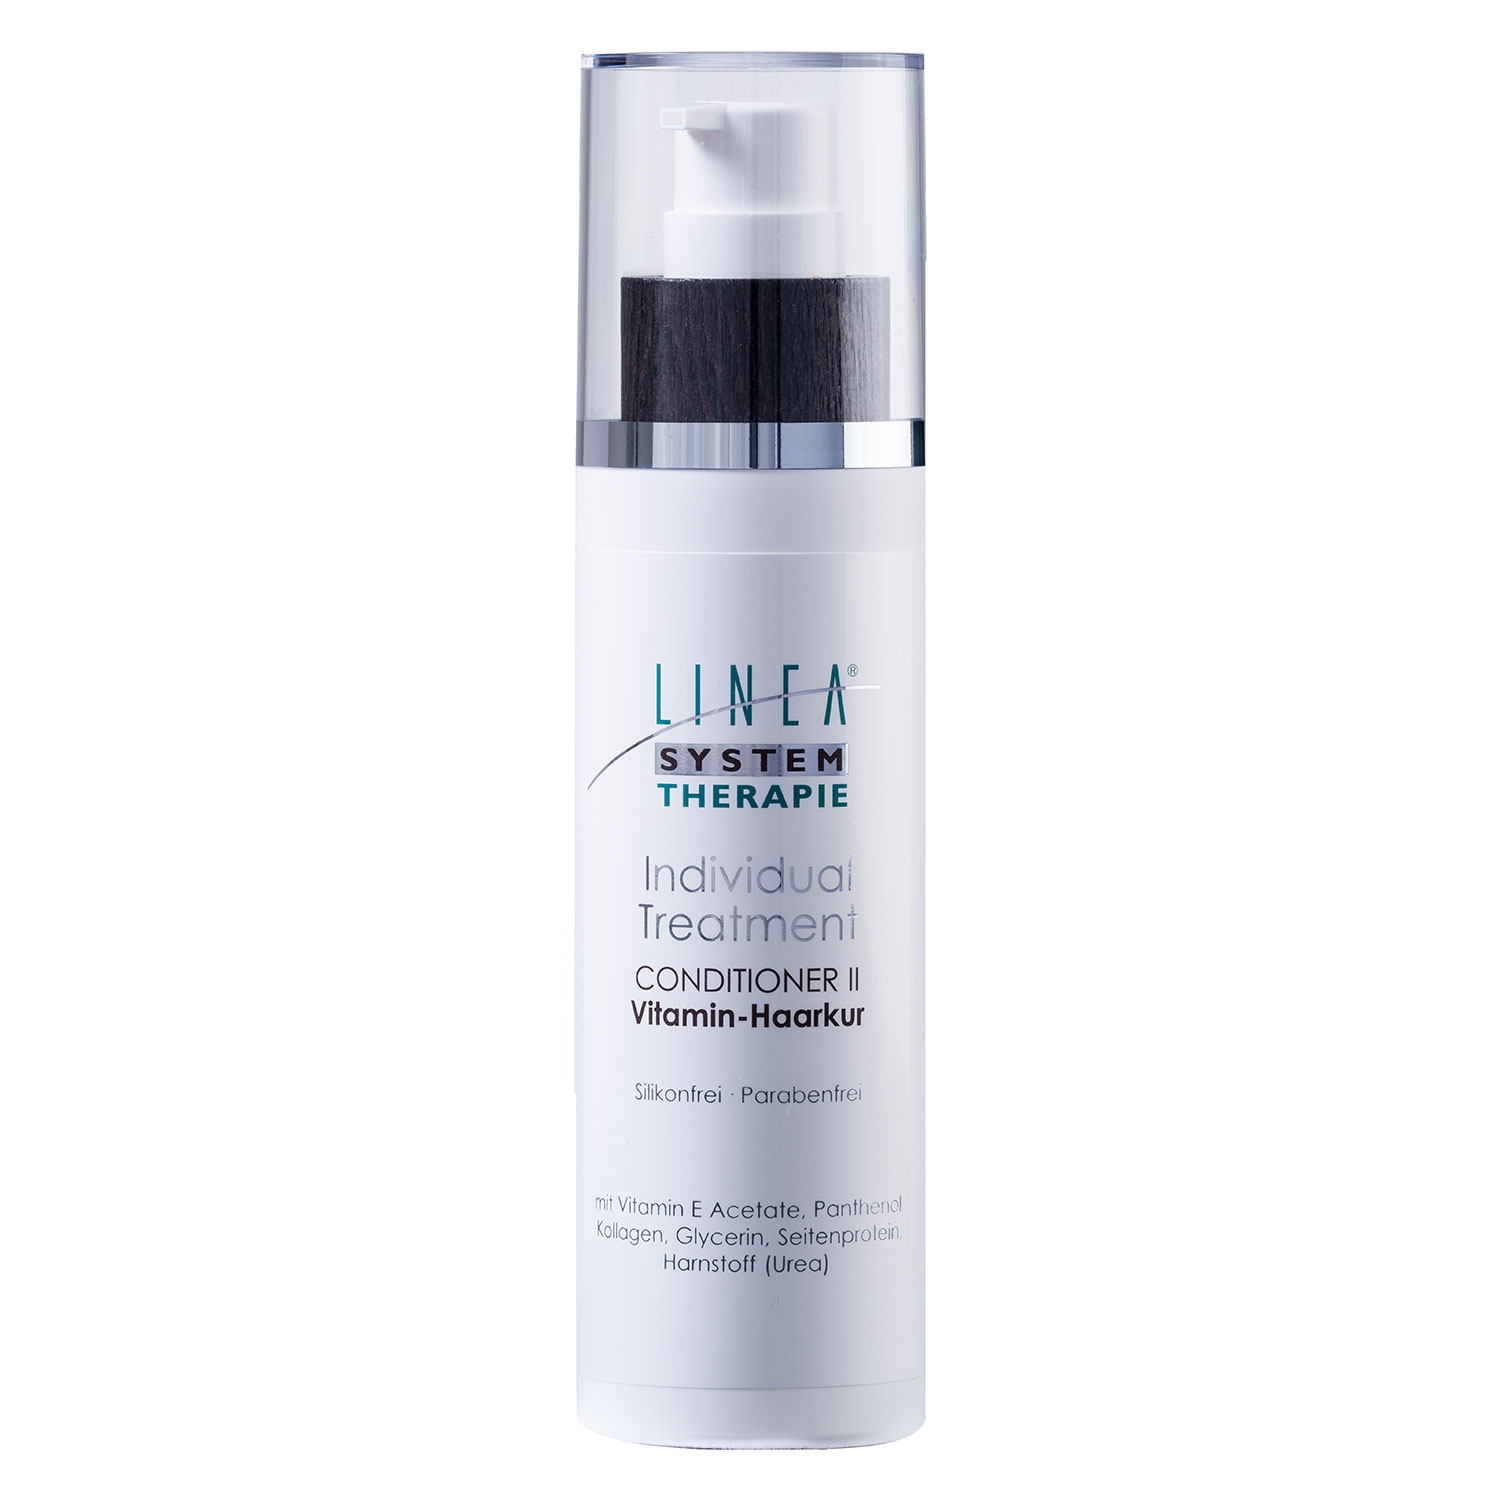 Product image from Linea - Vitamin Haarkur Conditioner 2